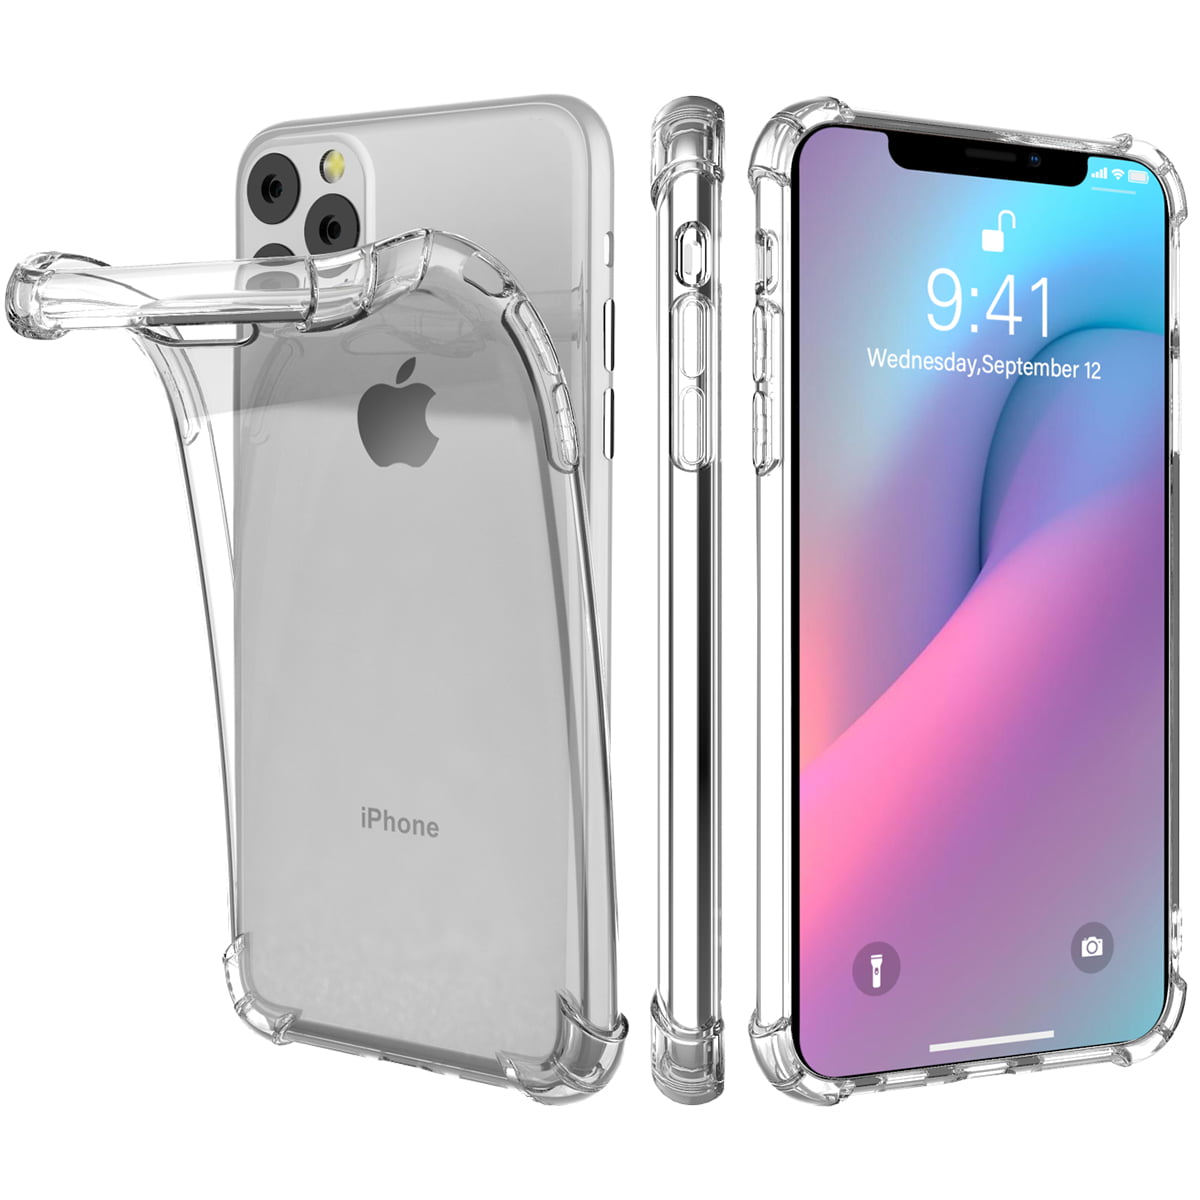 Case For Apple Iphone 11 Xi Pro Max 6 5 Inch Tpu Gradient Mobile Phone Case Full Package Shock Resistant Crash Phone Case For Iphone 11 Pro Max 6 5 Inches Transparent Walmart Com